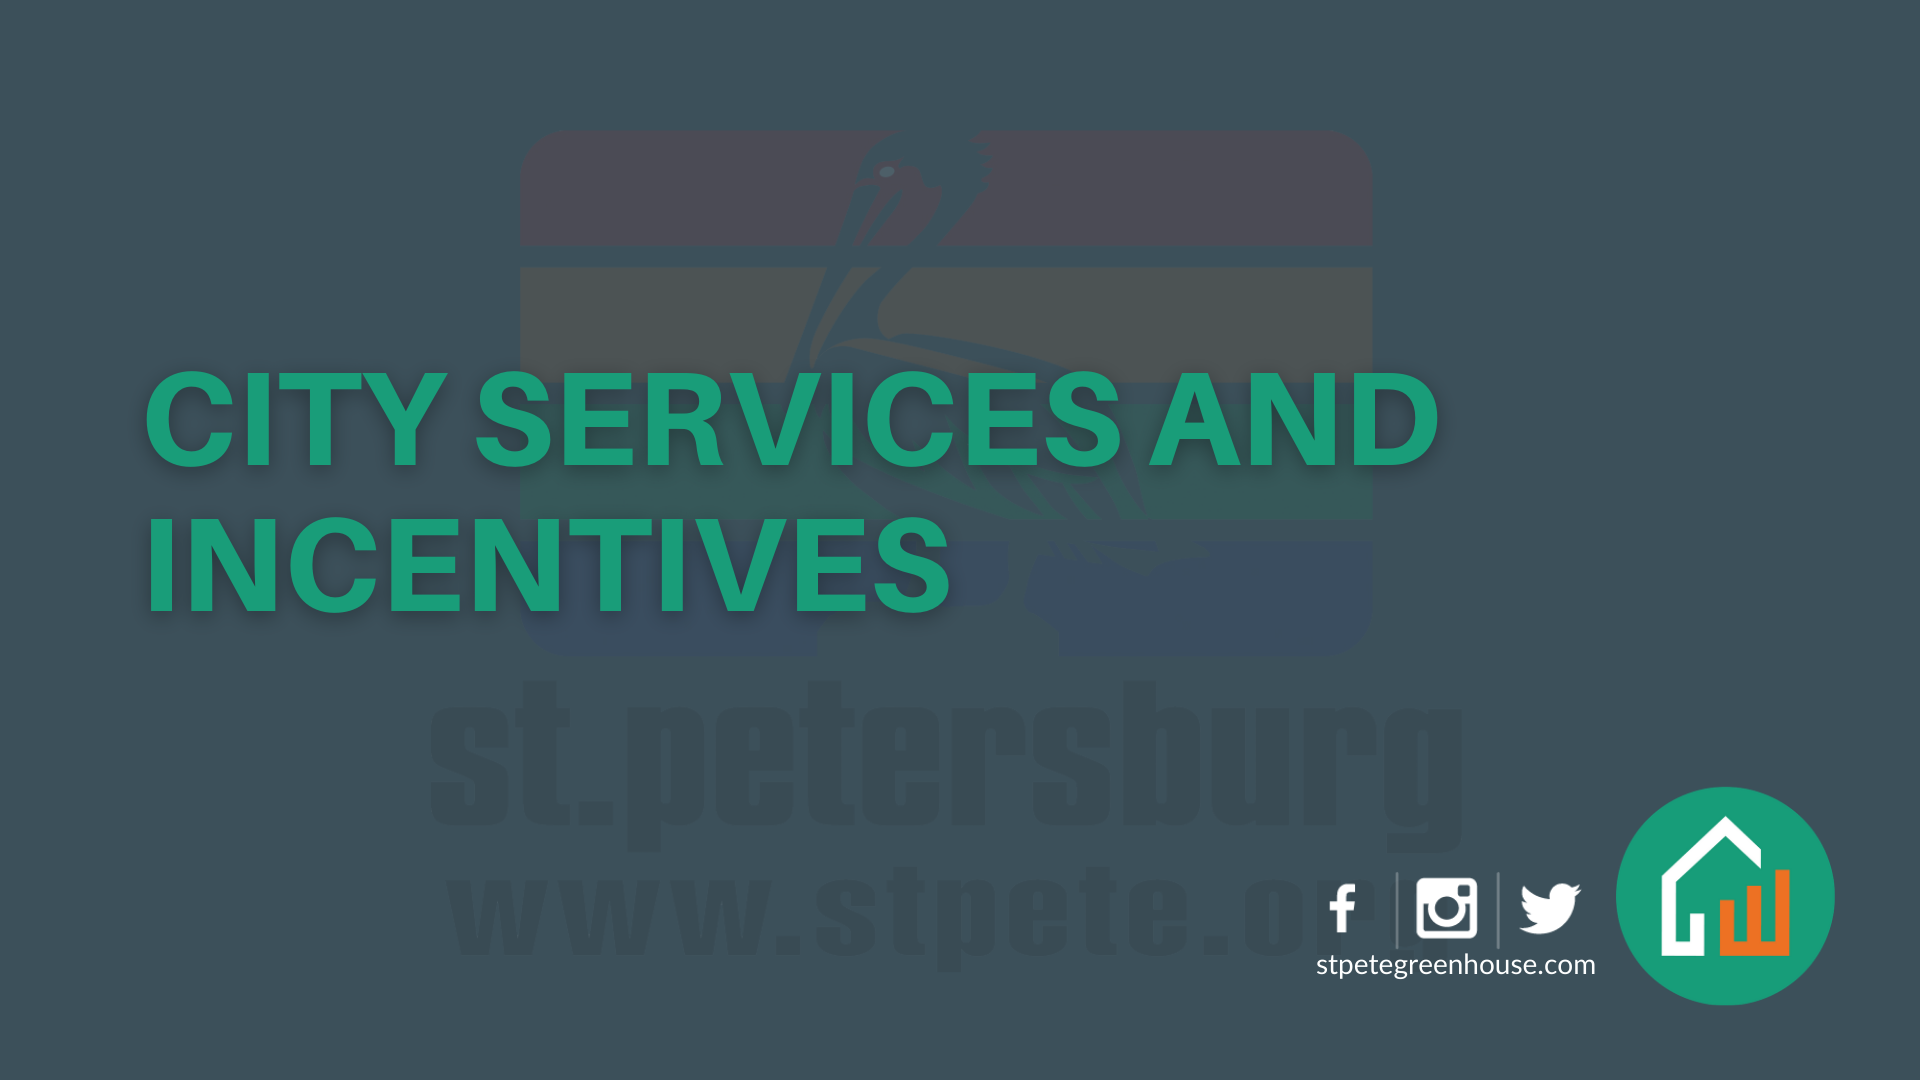 City Services and Incentives-image